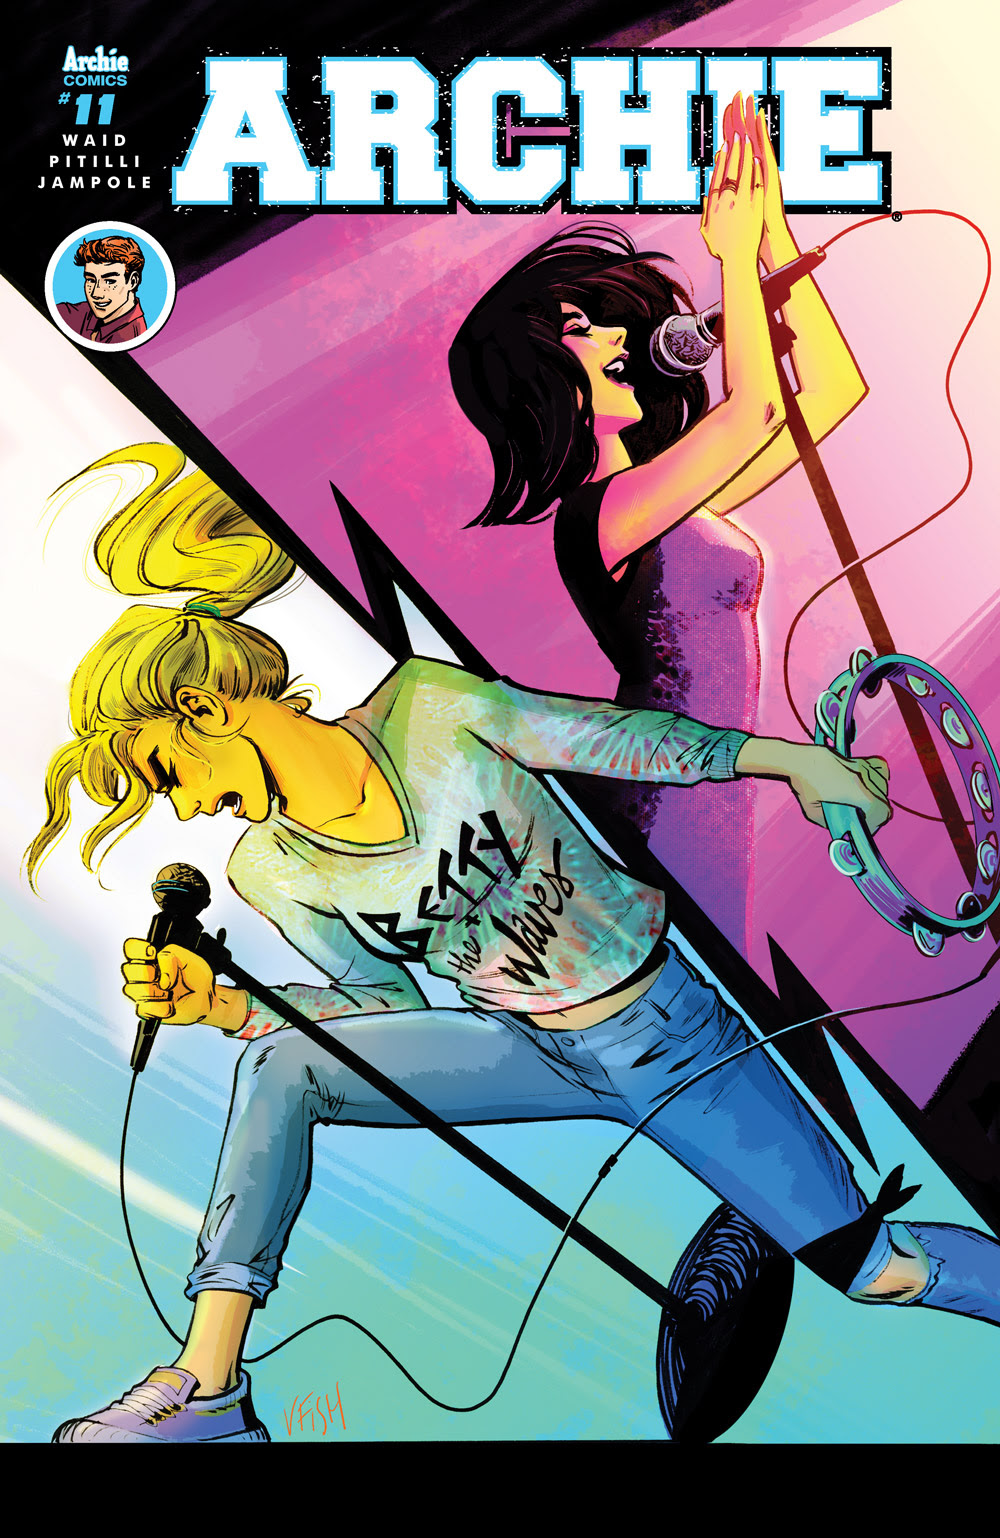 Archie #11 cover by Veronica Fish